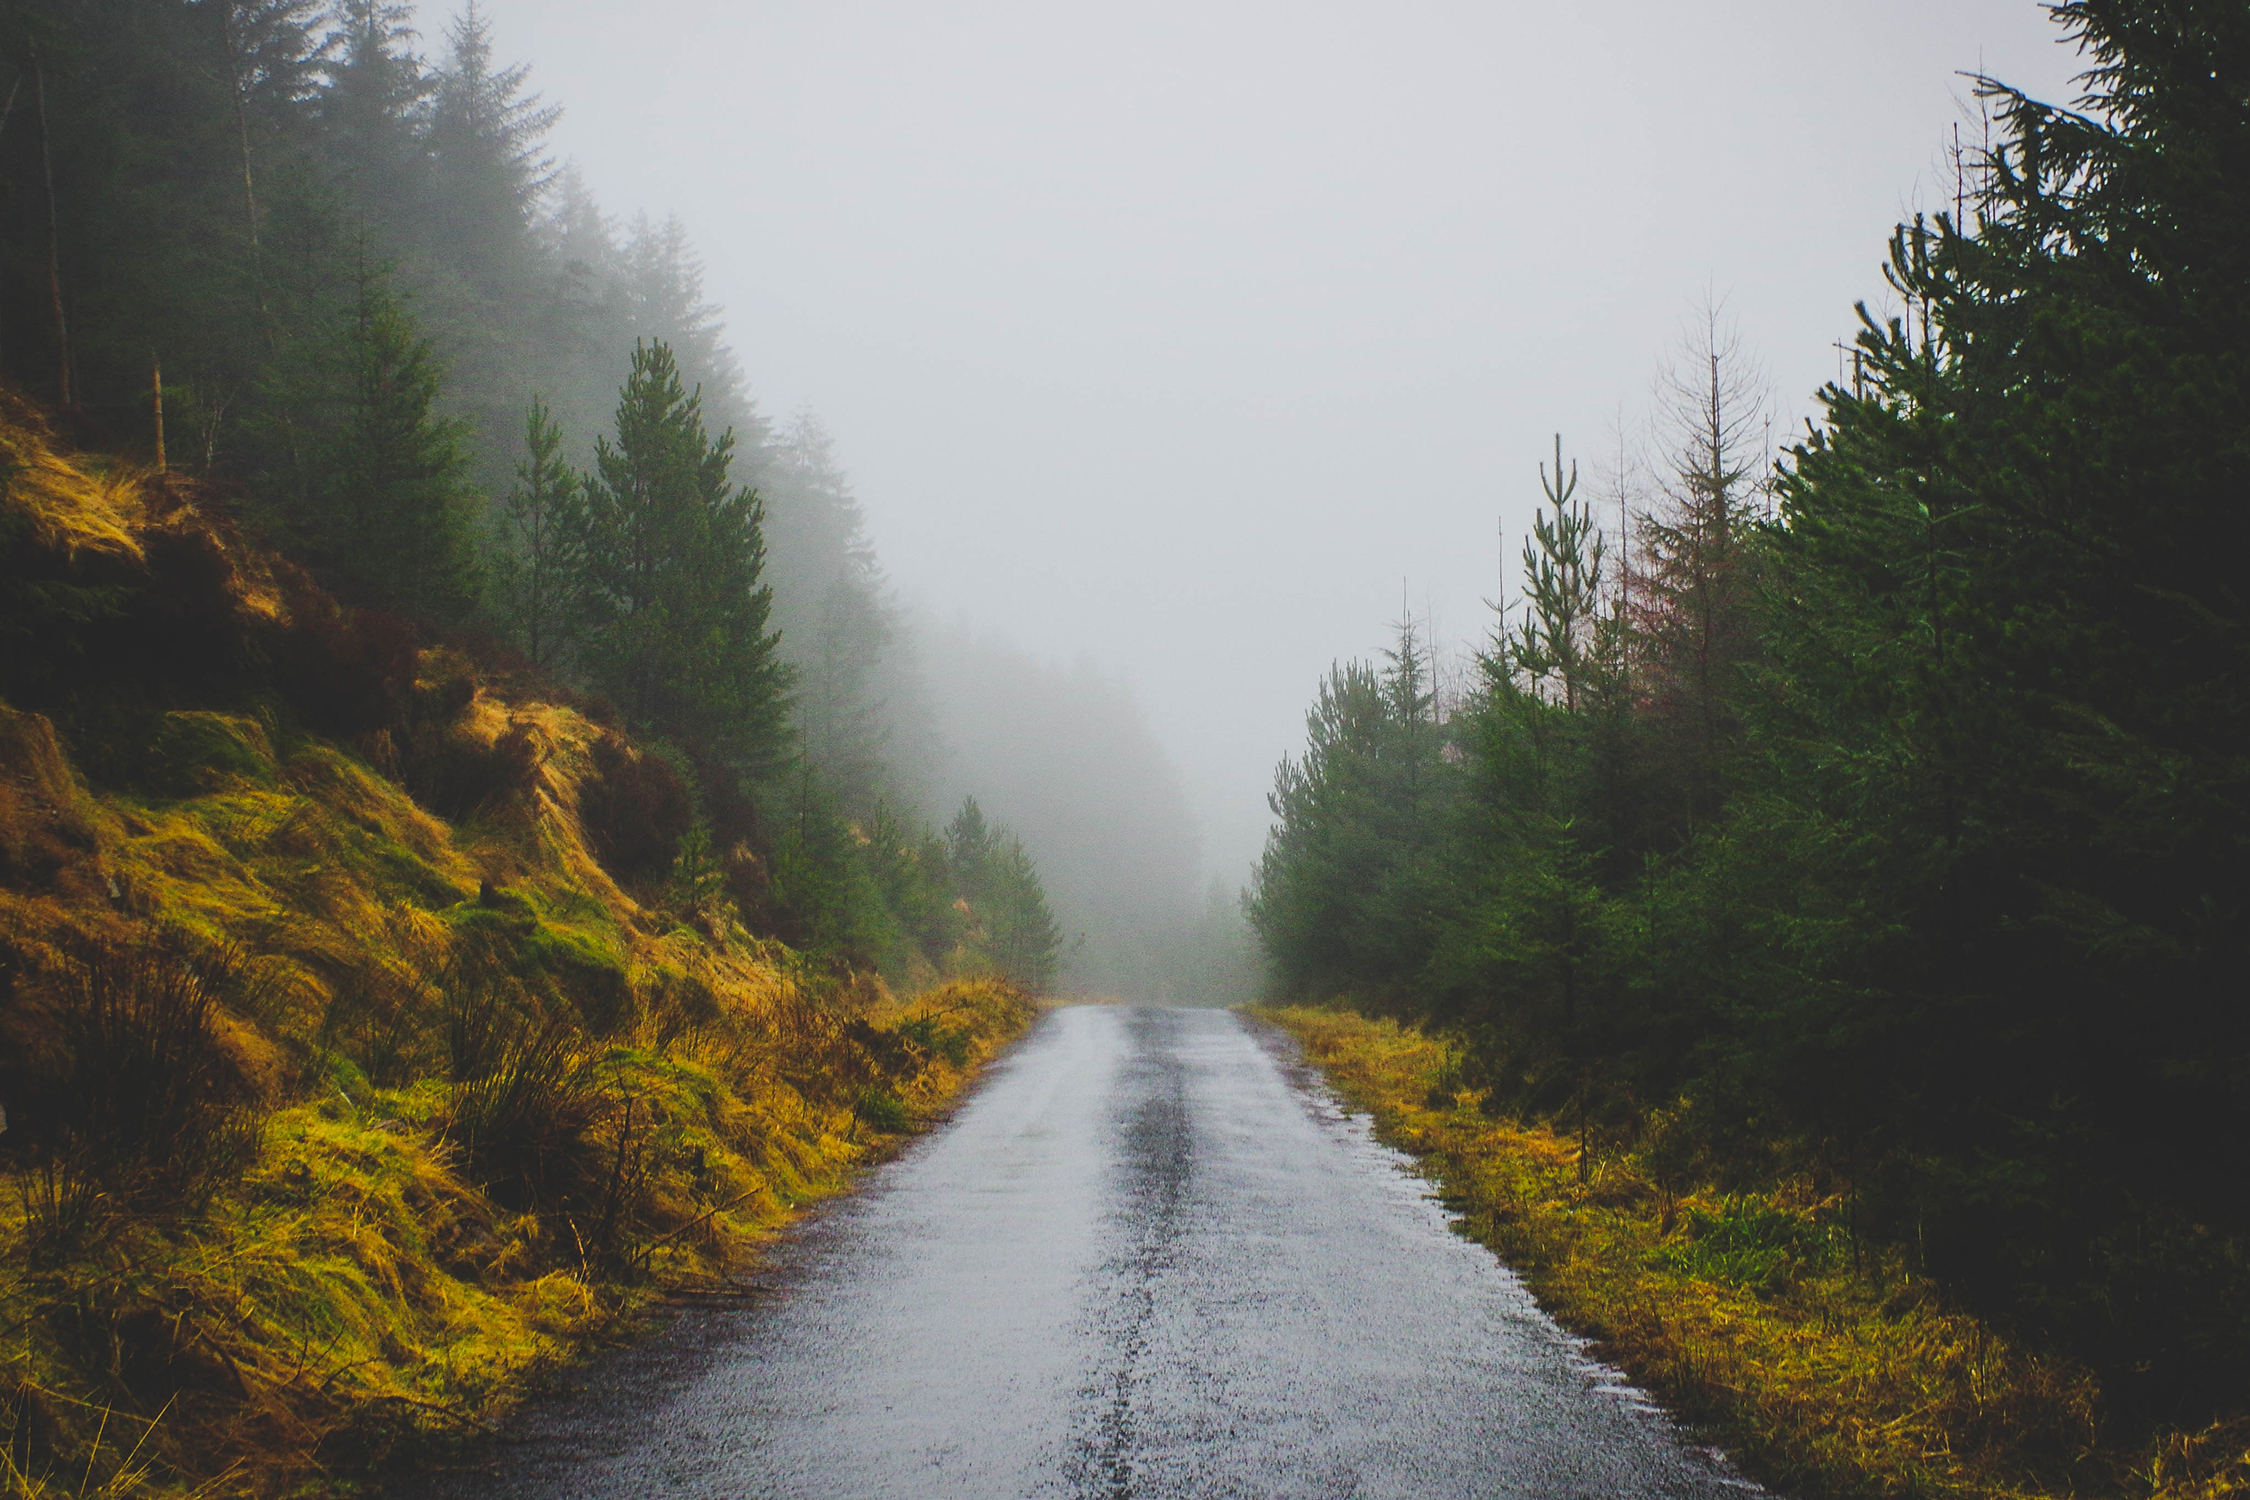 Rainy road with moss and trees.